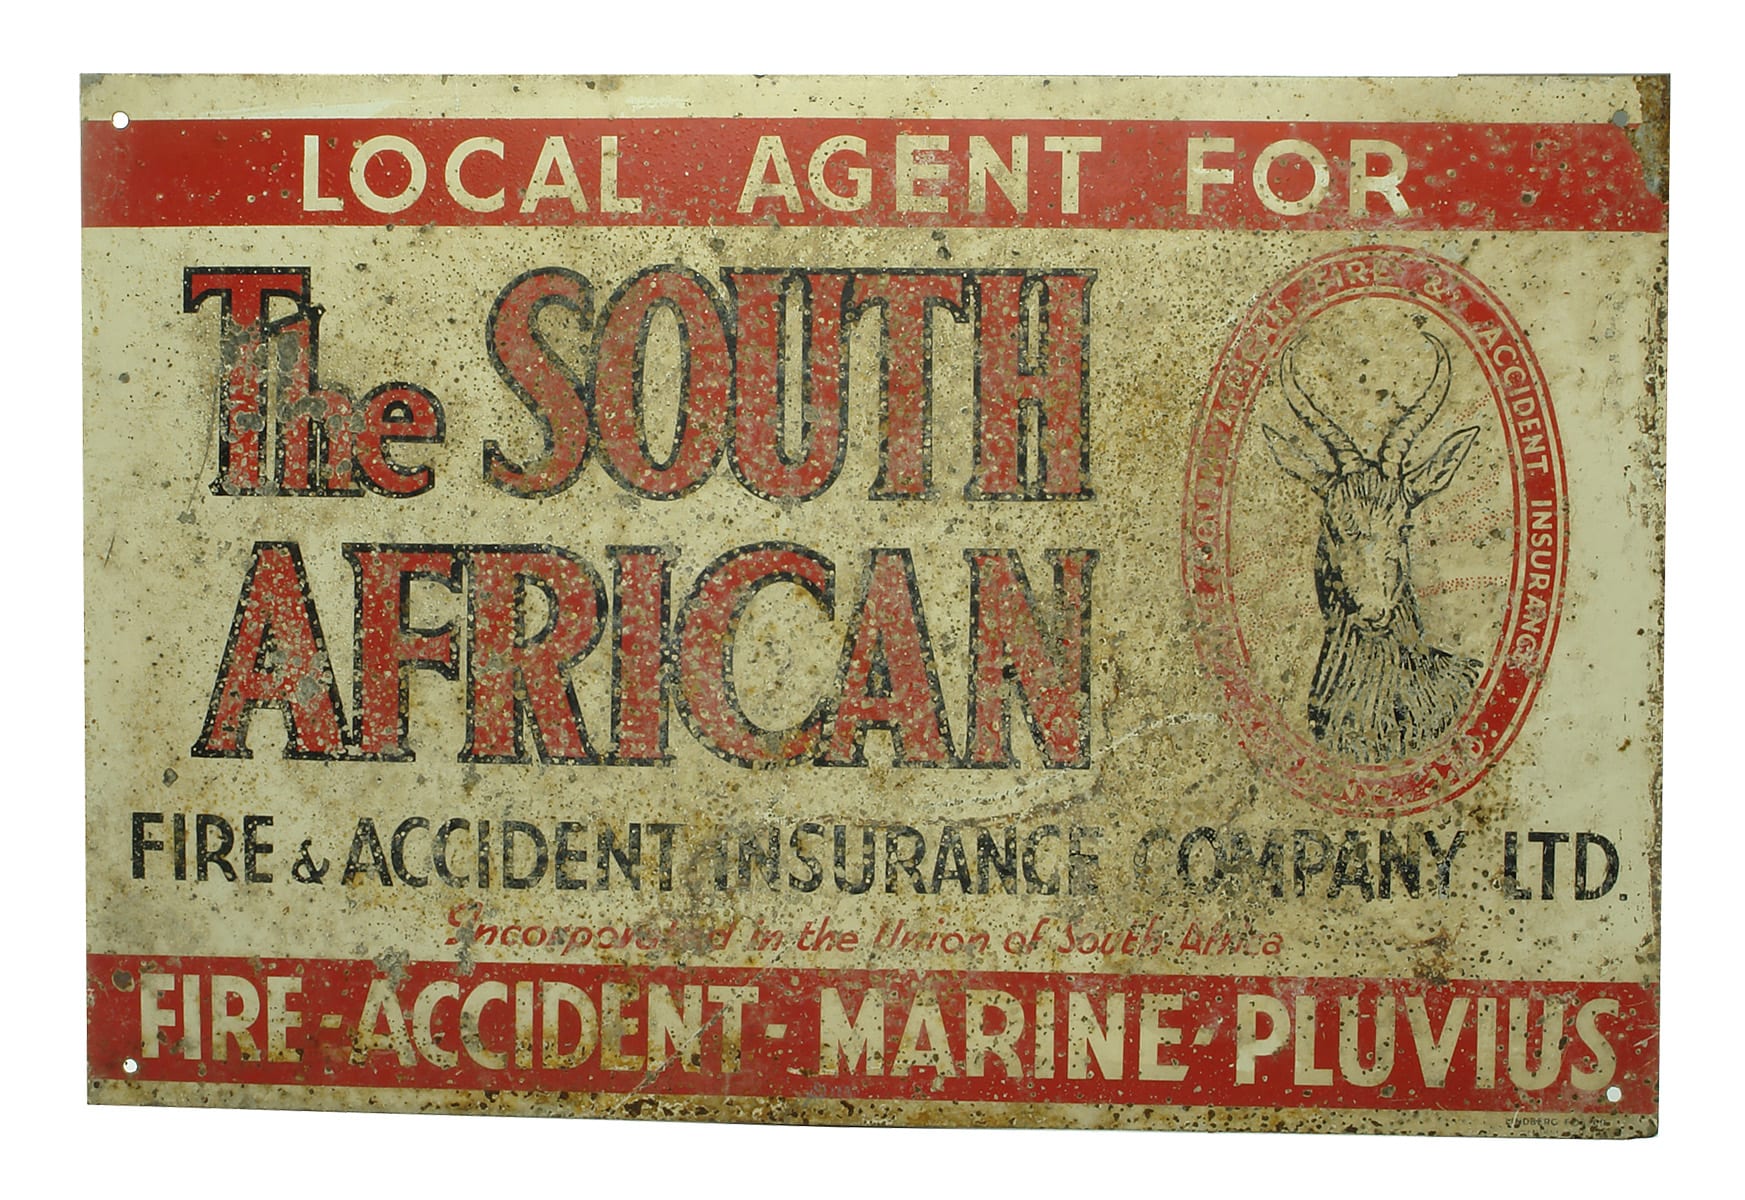 The South African Fire Accident Insurance Company Sign